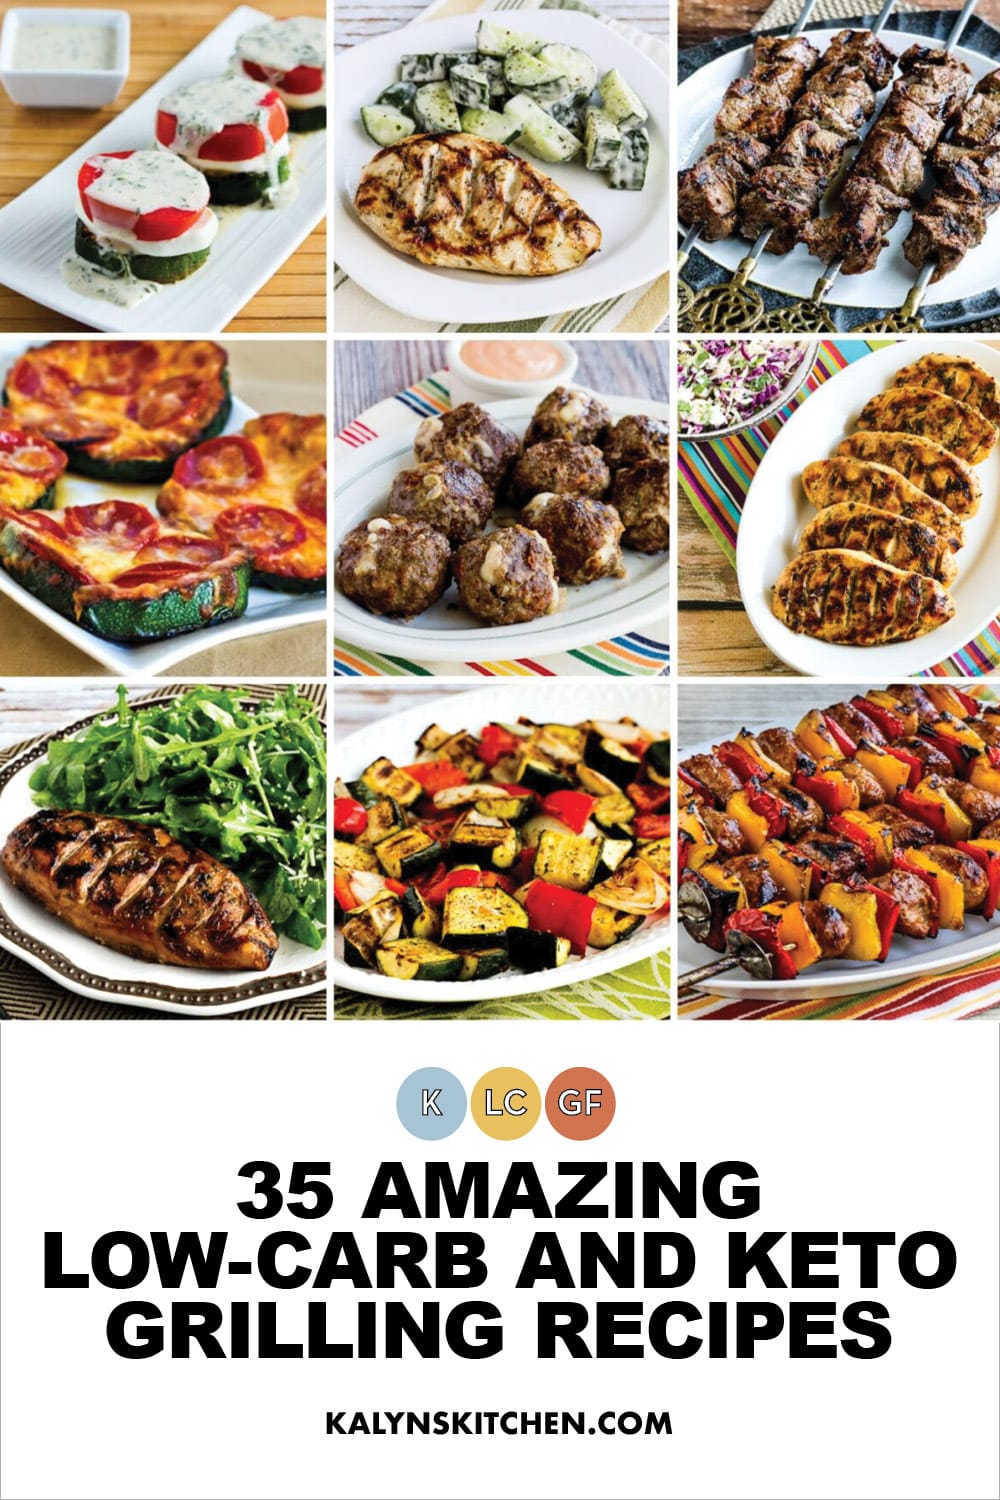 Pinterest image of 35 Amazing Low-Carb and Keto Grilling Recipes